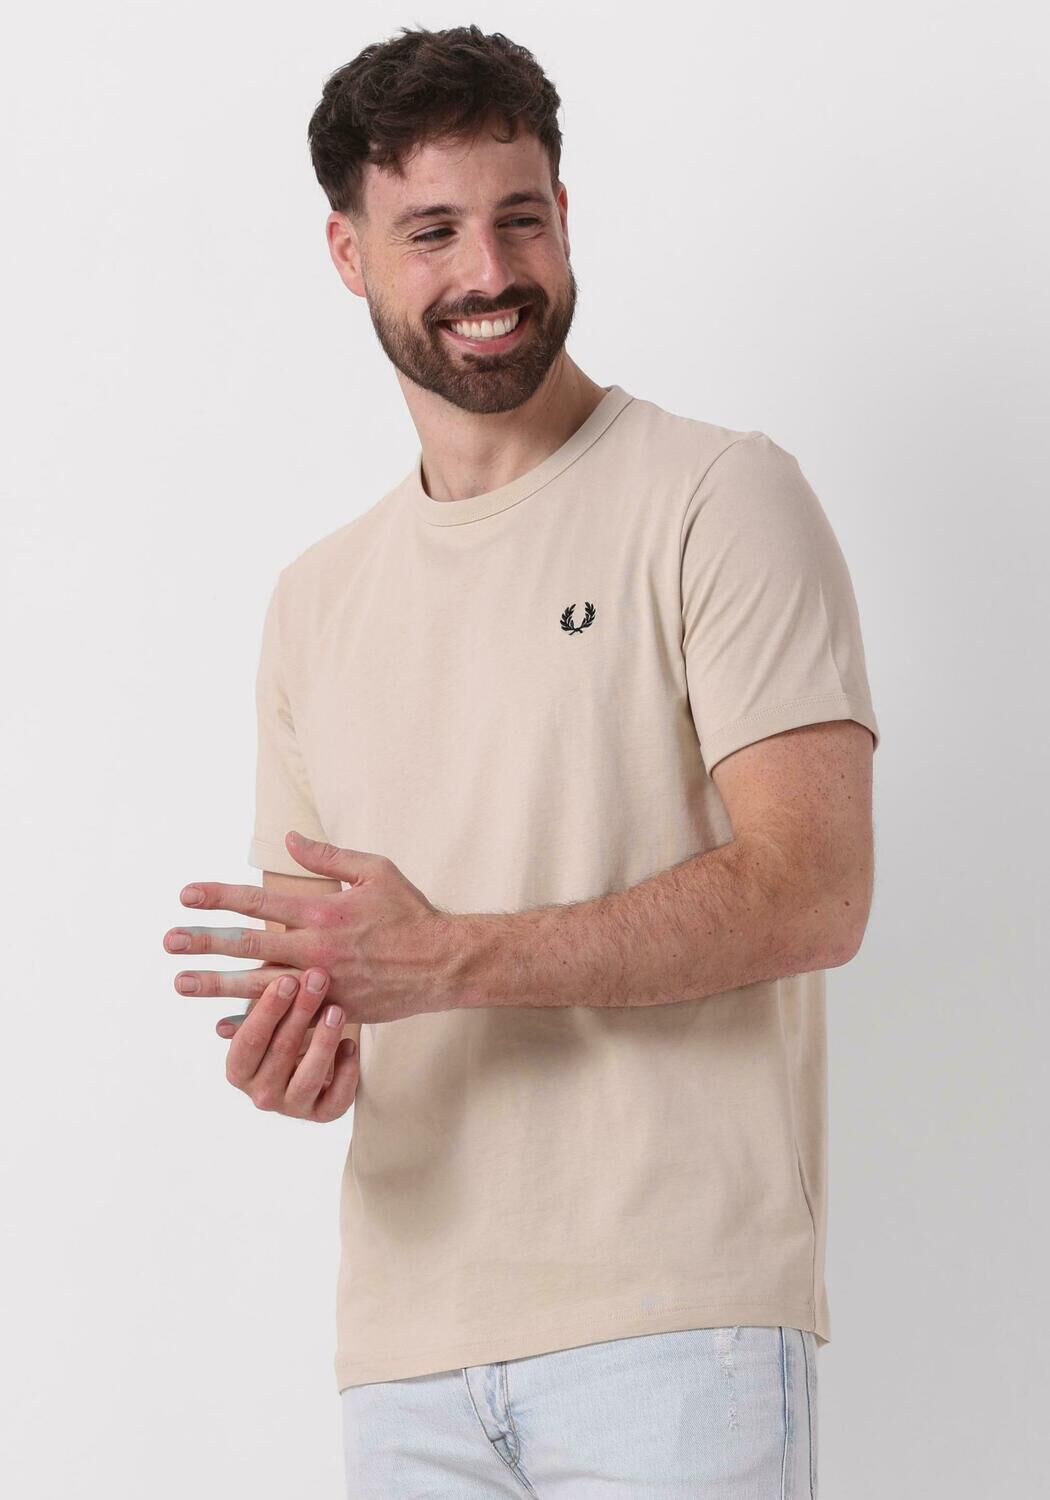 FRED PERRY Heren Polo's & T-shirts Ringer T-shirt Gebroken Wit